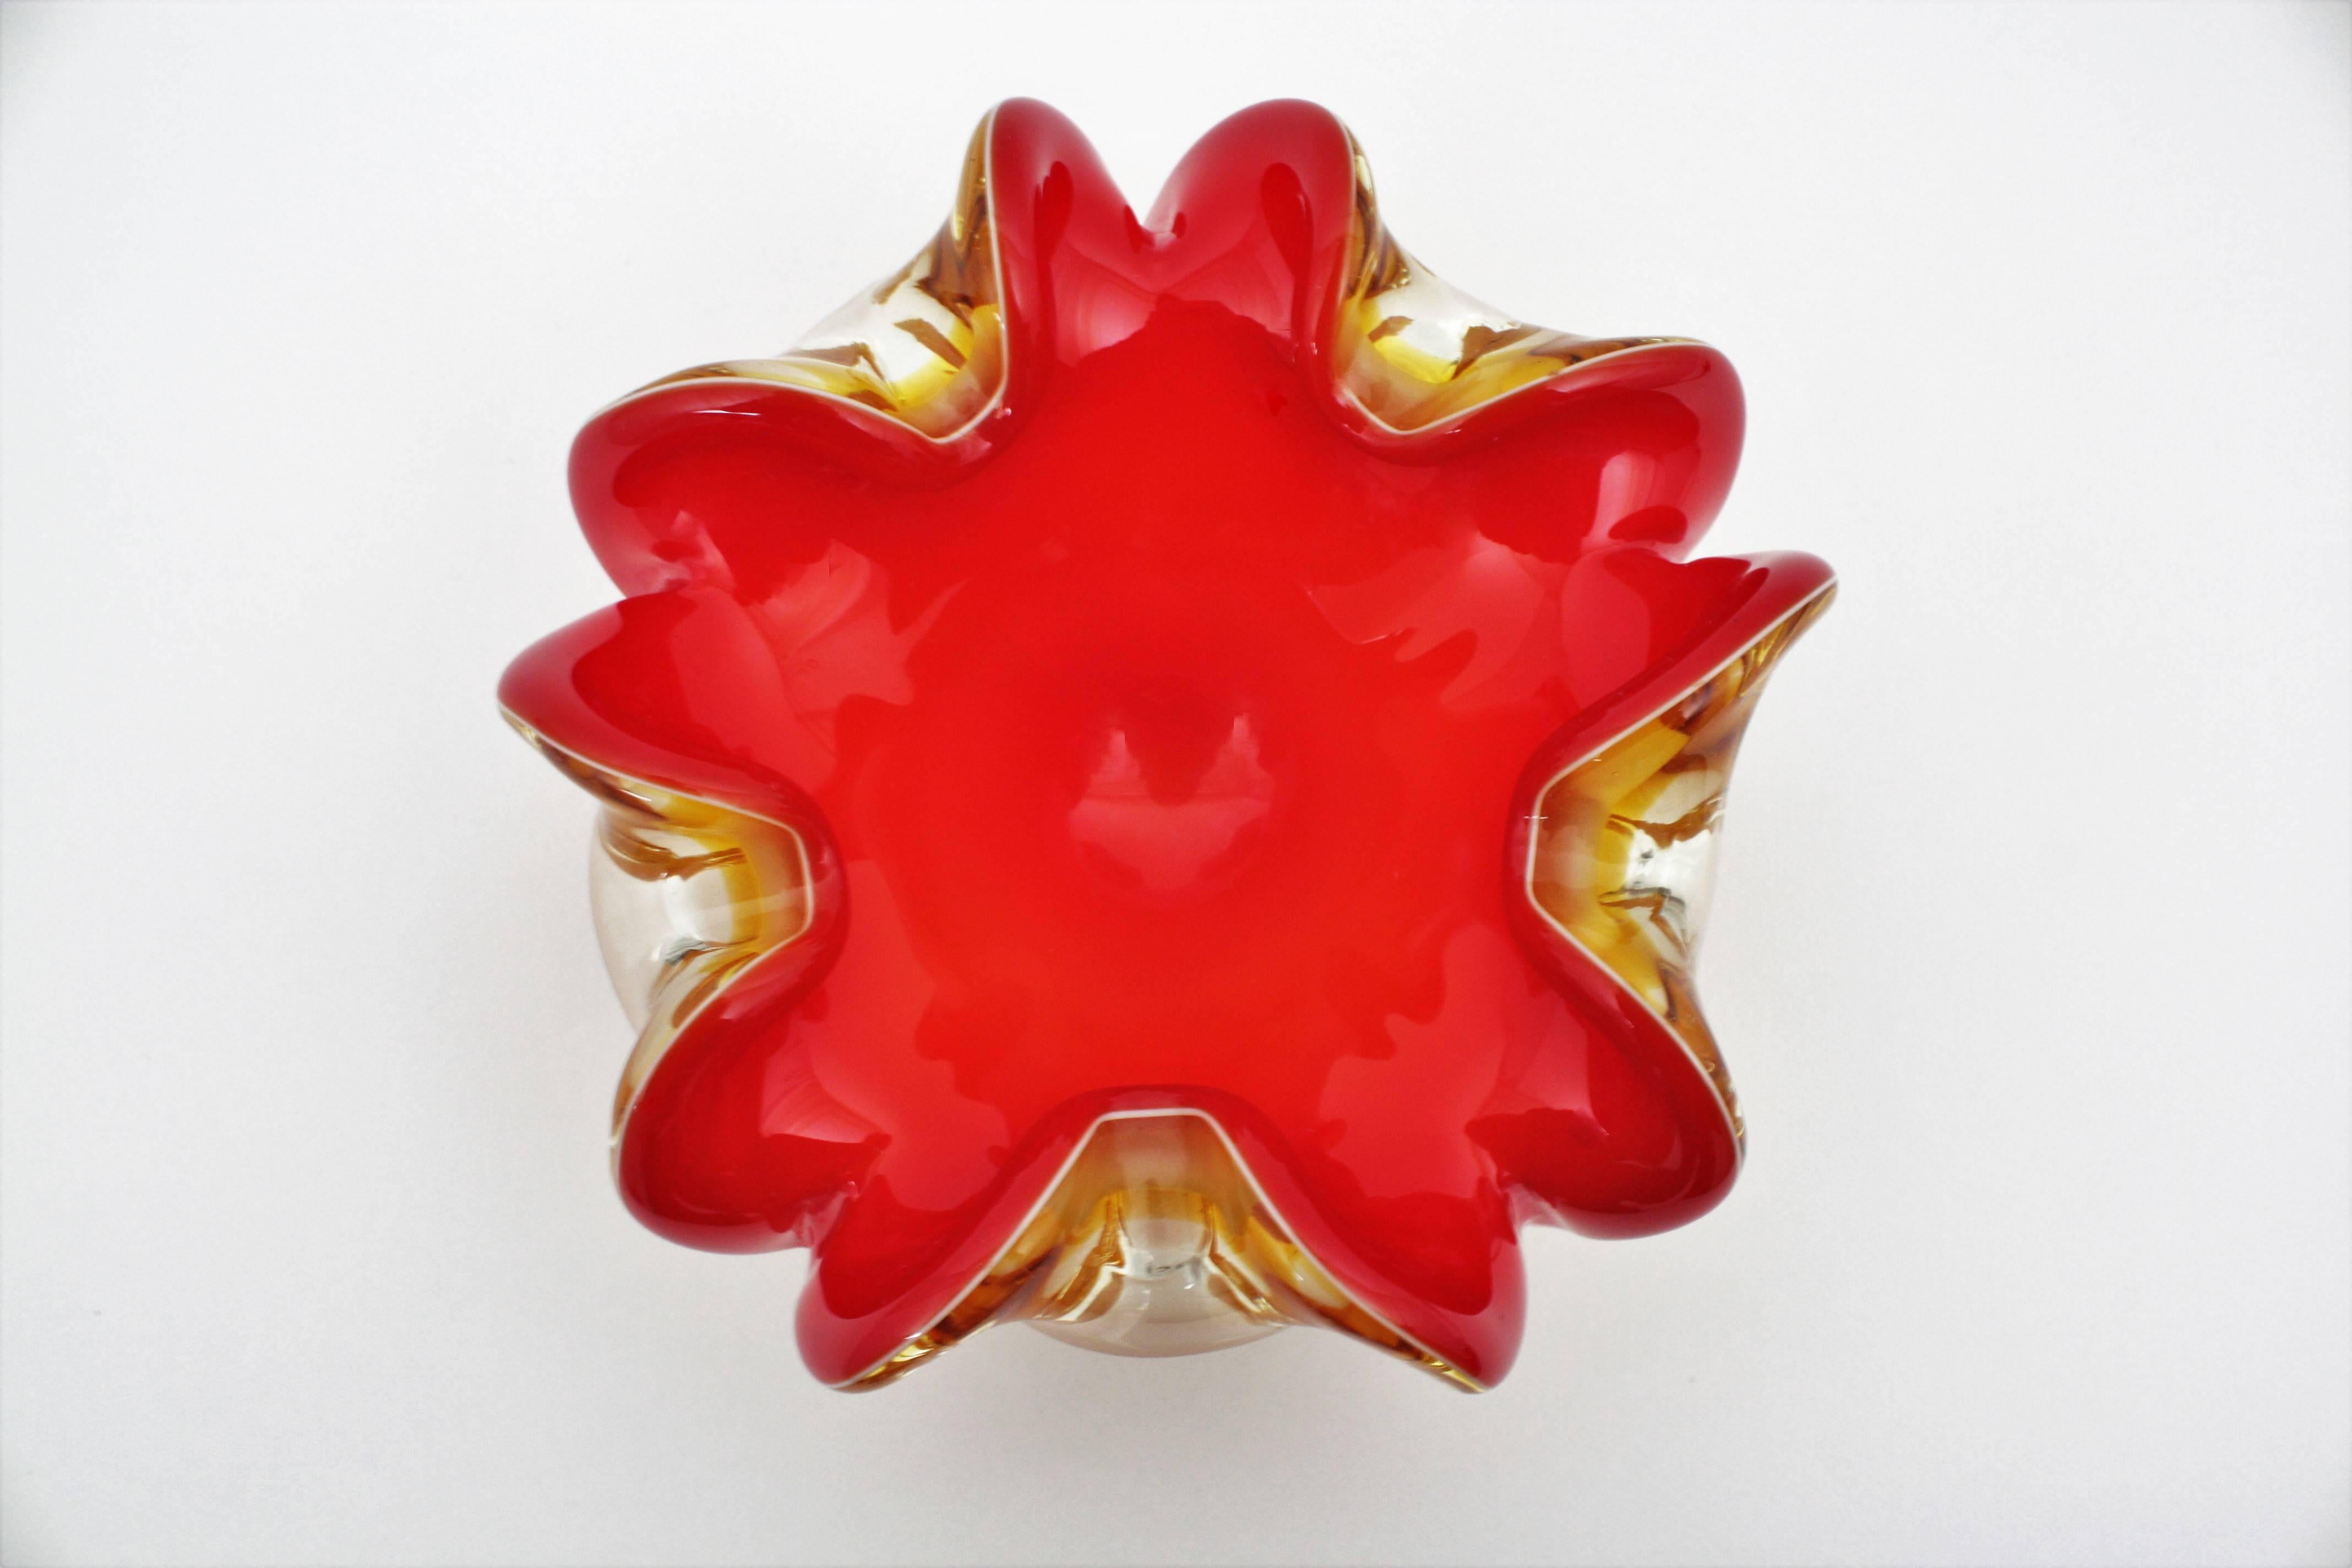 20th Century Red and Amber Sommerso Murano Glass Art Flower Bowl